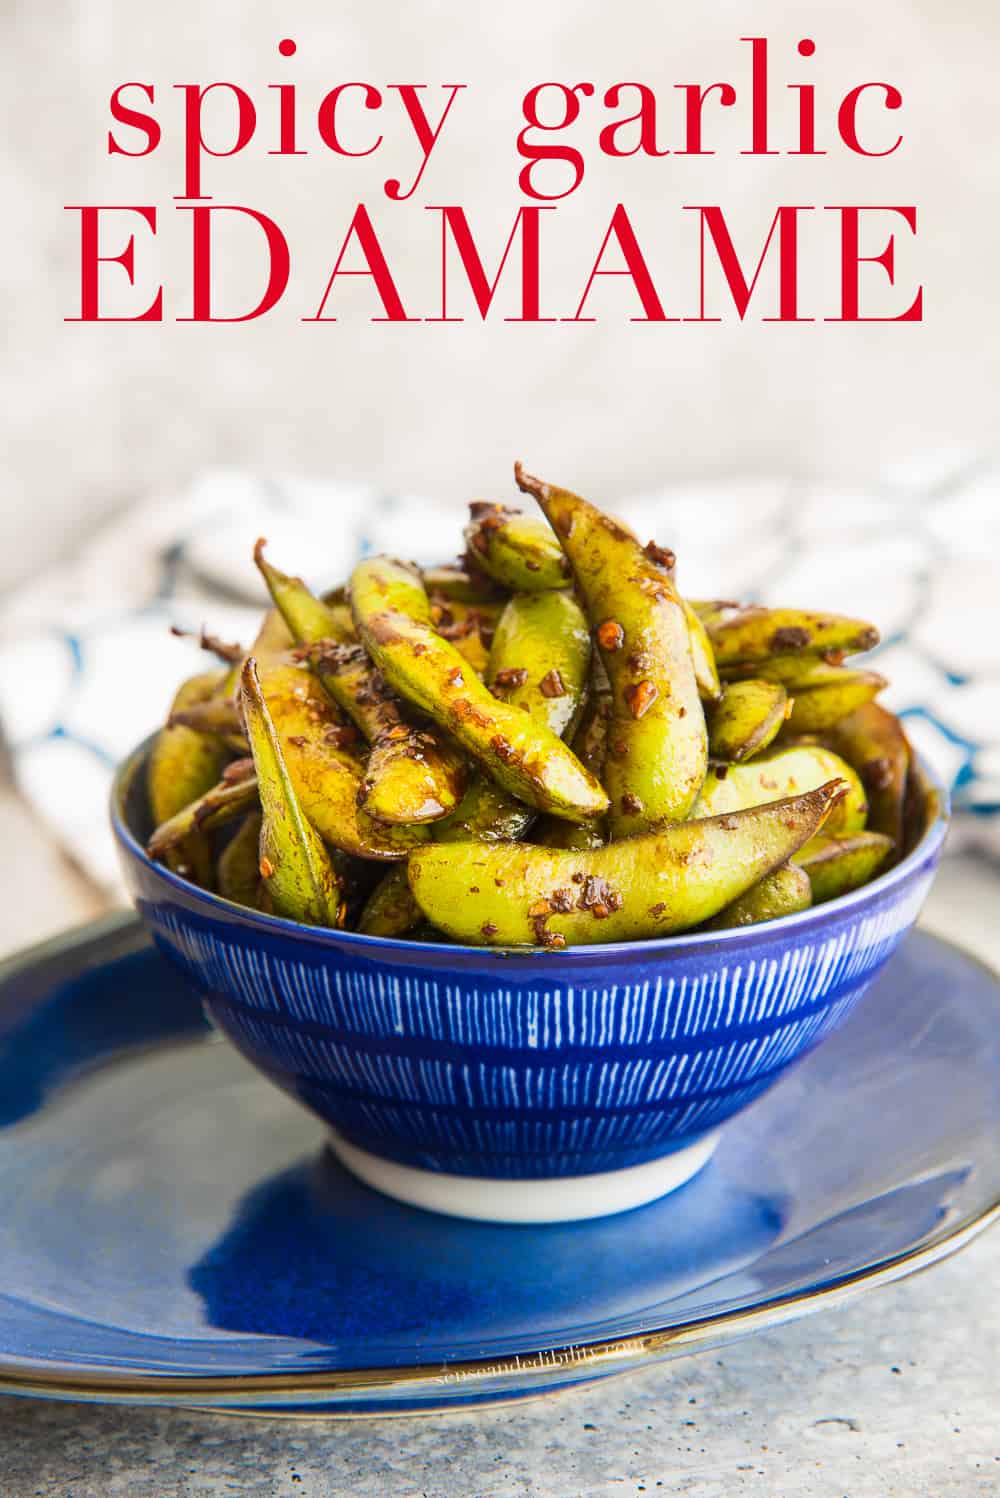 Spicy Garlic Edamame has a punch of spice, fragrant garlic and creamy soybeans that make it the perfect snack or appetizer. Skip the sushi restaurants forever with this recipe. #edamame #soybeans #unitedsoybeanboard #tastetour #sponsored #bestfoodfacts #spicyedamame #garlicedamame #Japanese #Asiansnacks #sushiathome #soy via @ediblesense